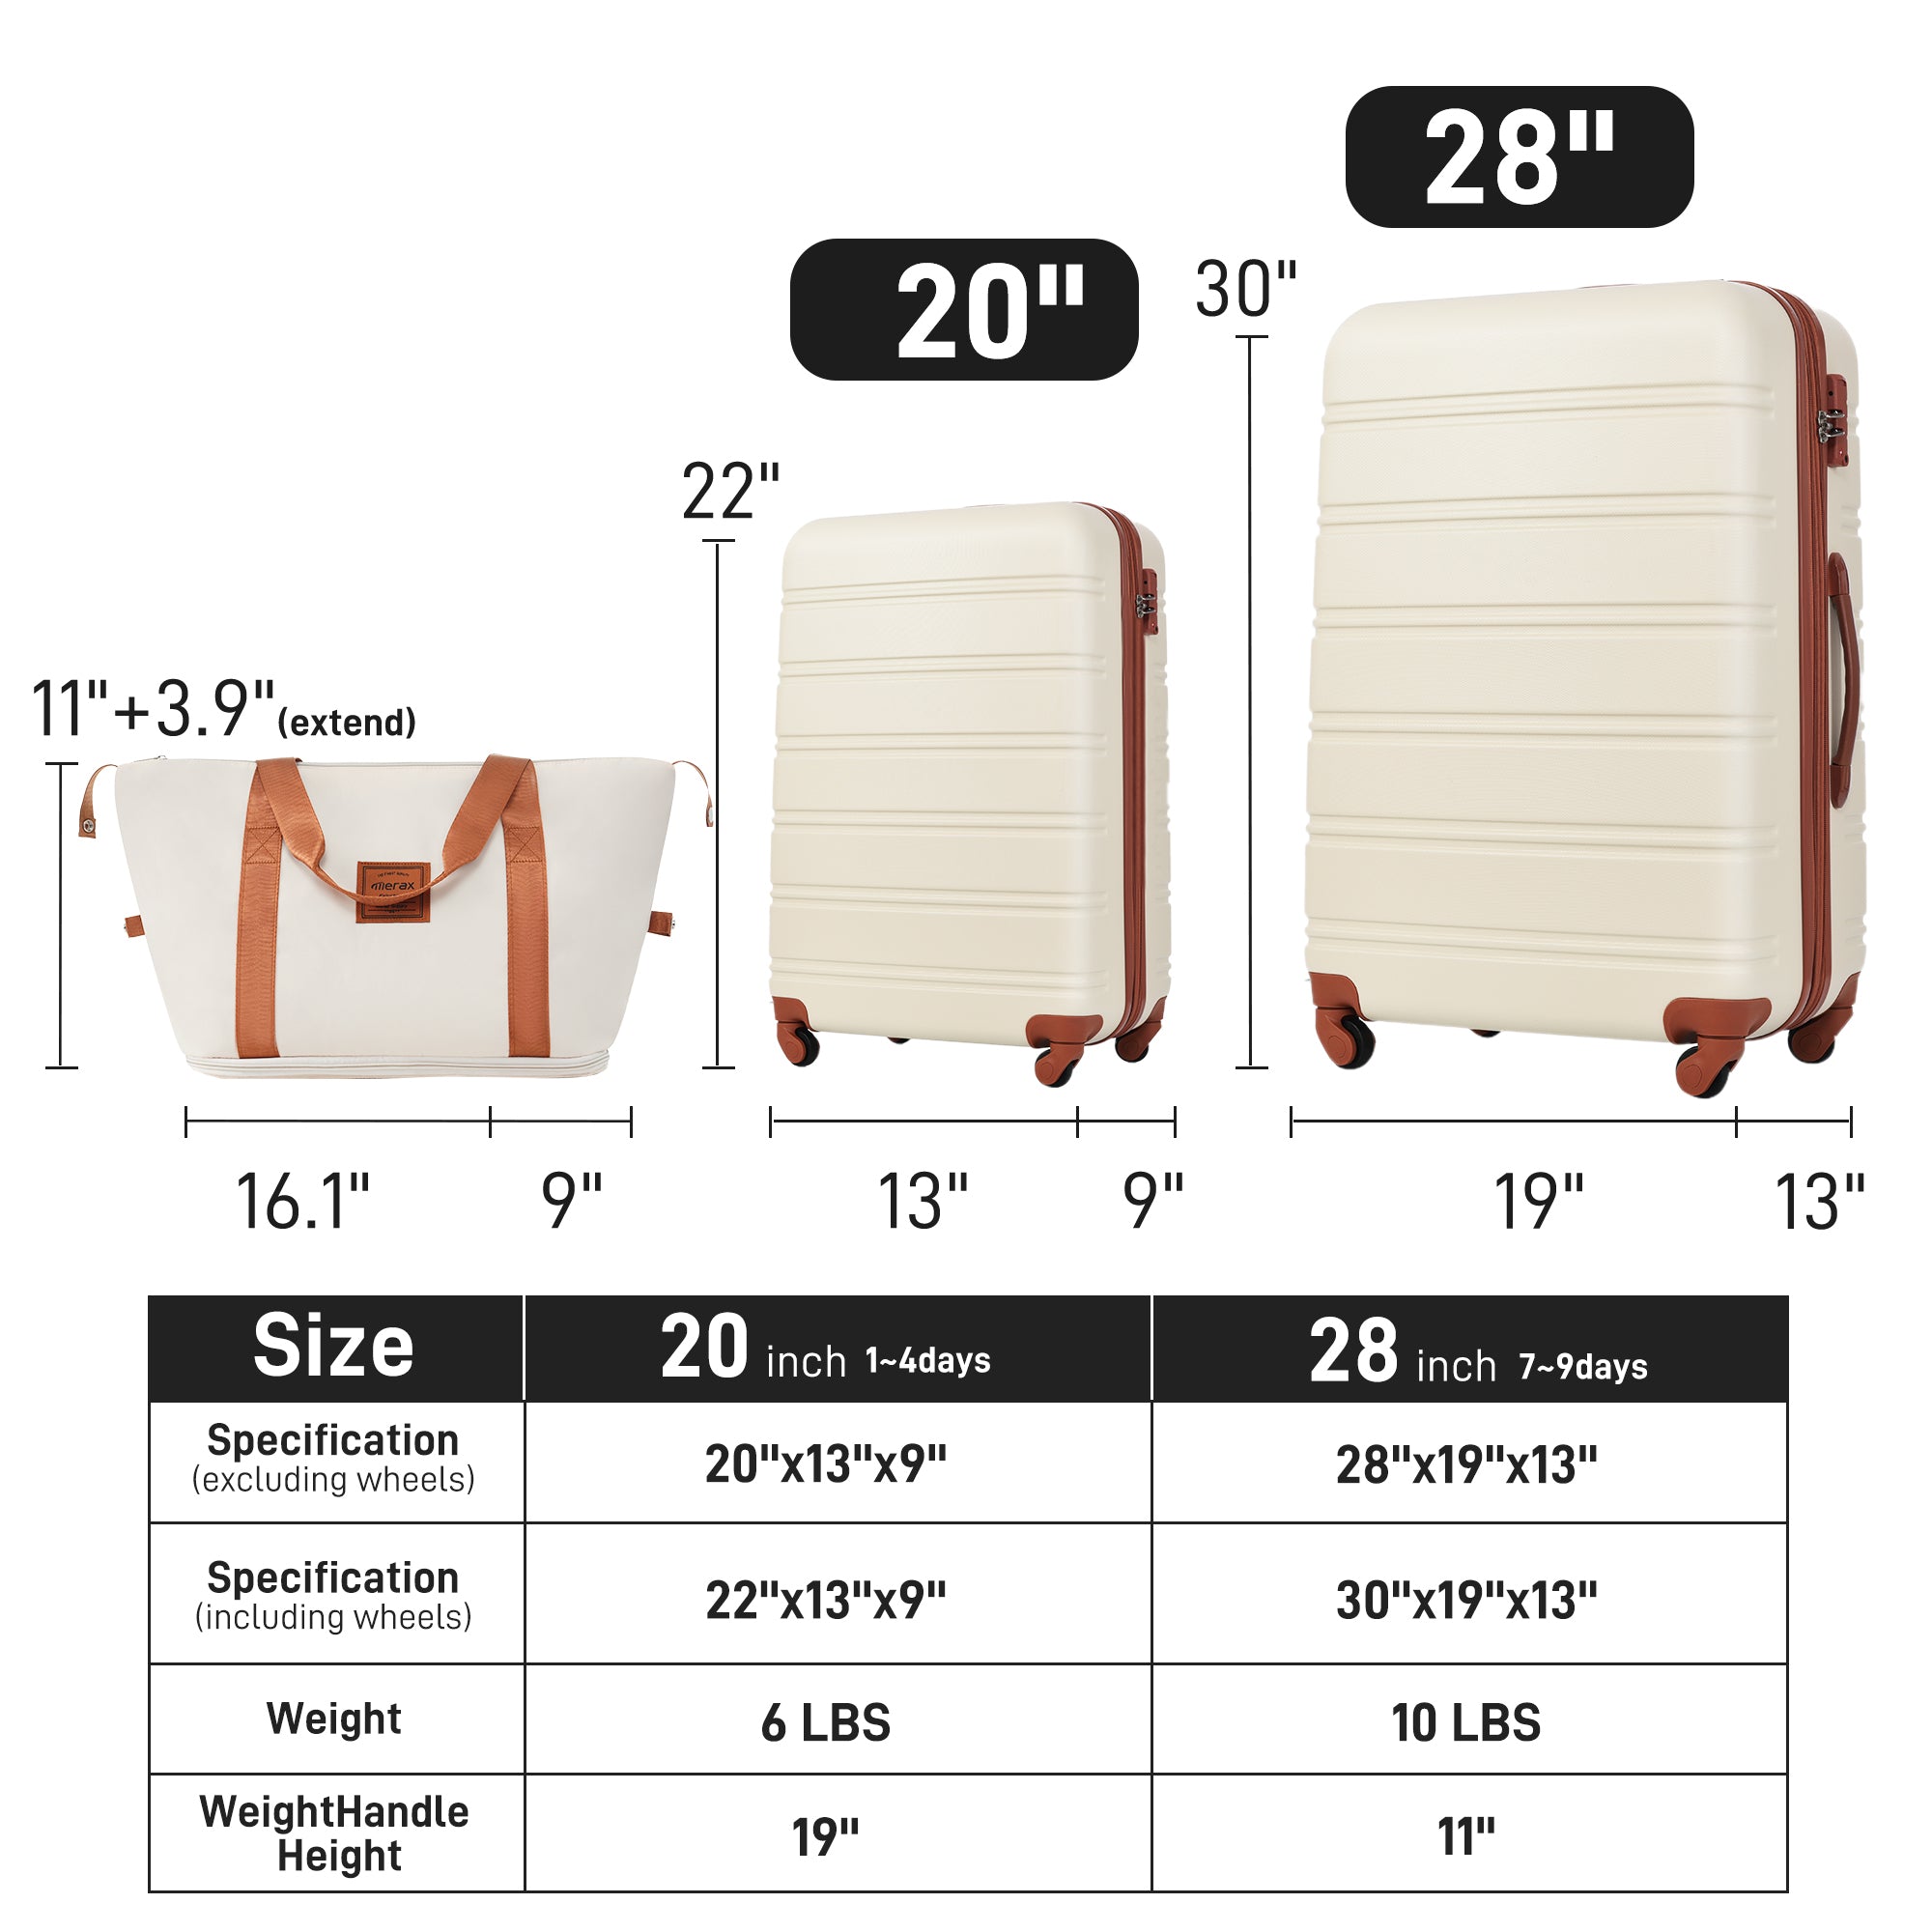 Hardshell Luggage Sets 2Pcs Bag Spinner Suitcase with brown+white-abs